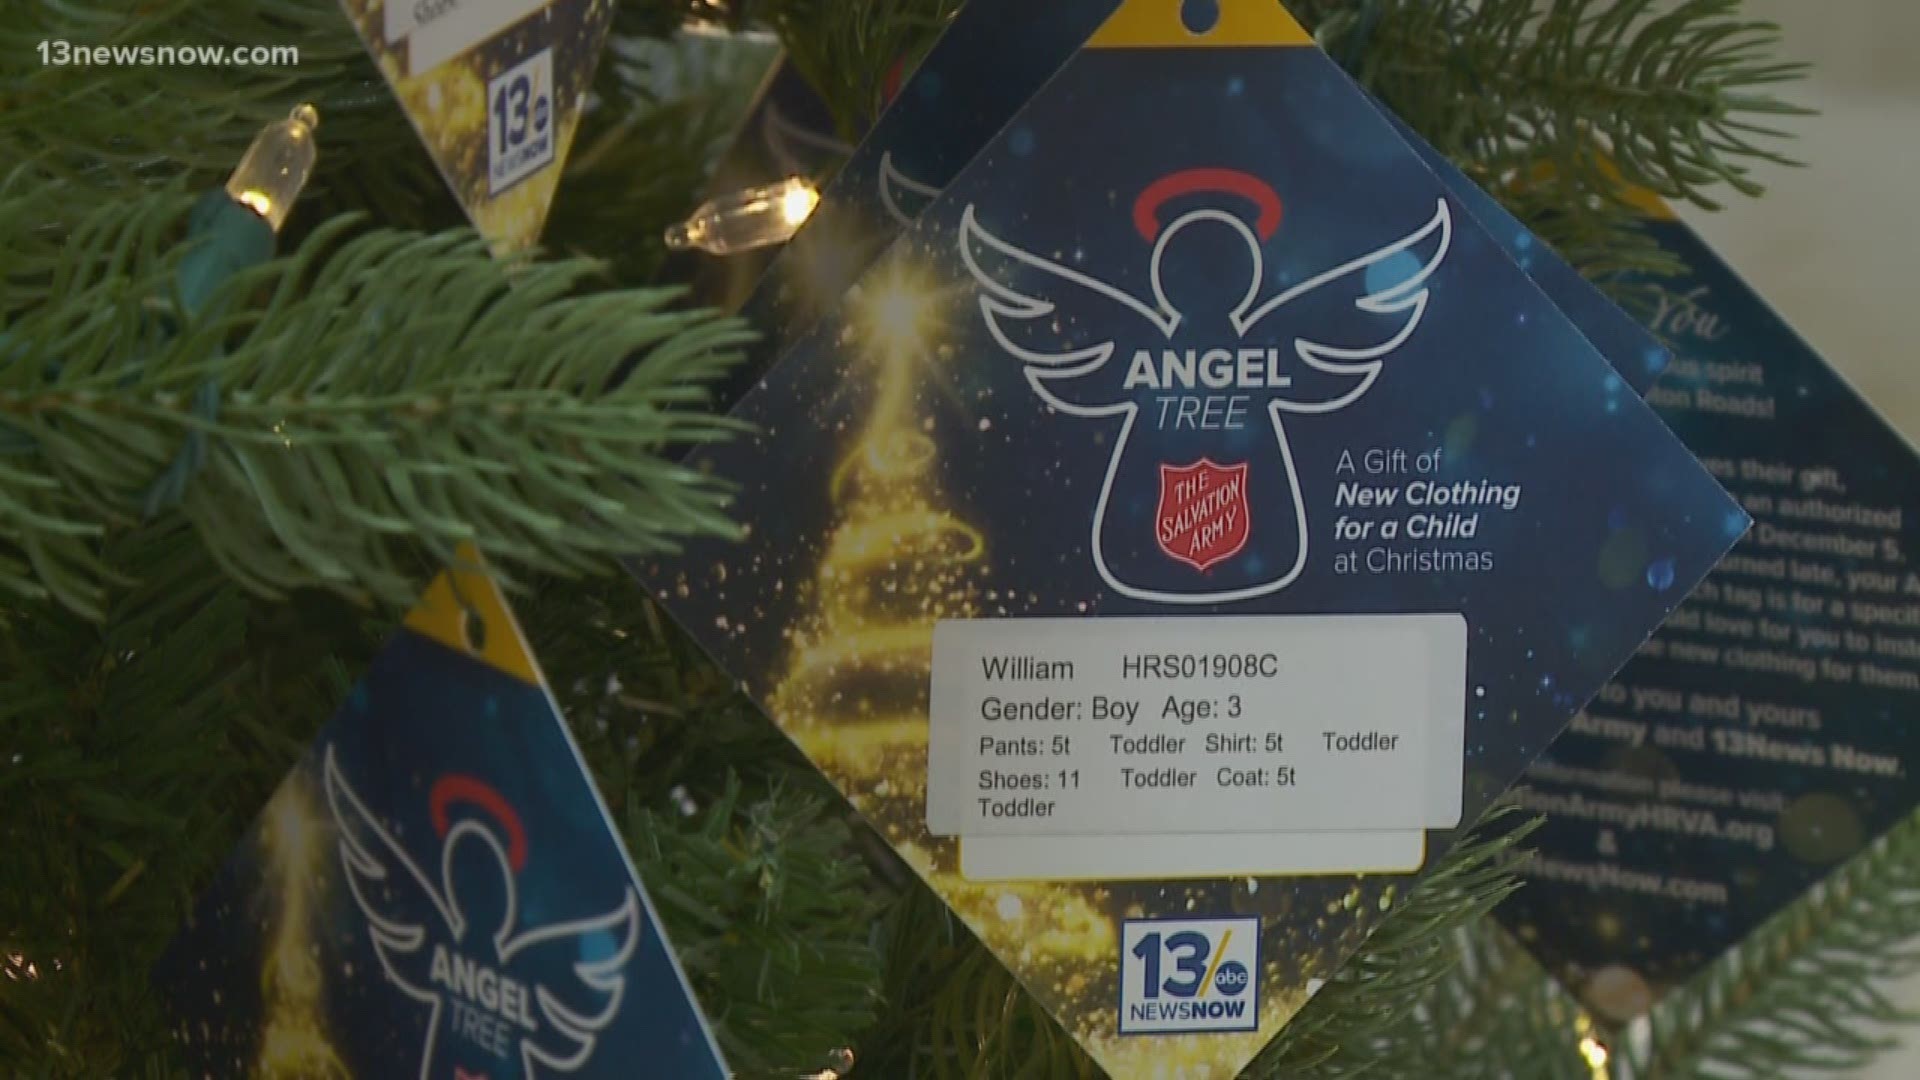 There's still tags for 500 children left unfulfilled in the Salvation Army's Angel Tree program. The deadline is quickly approaching.